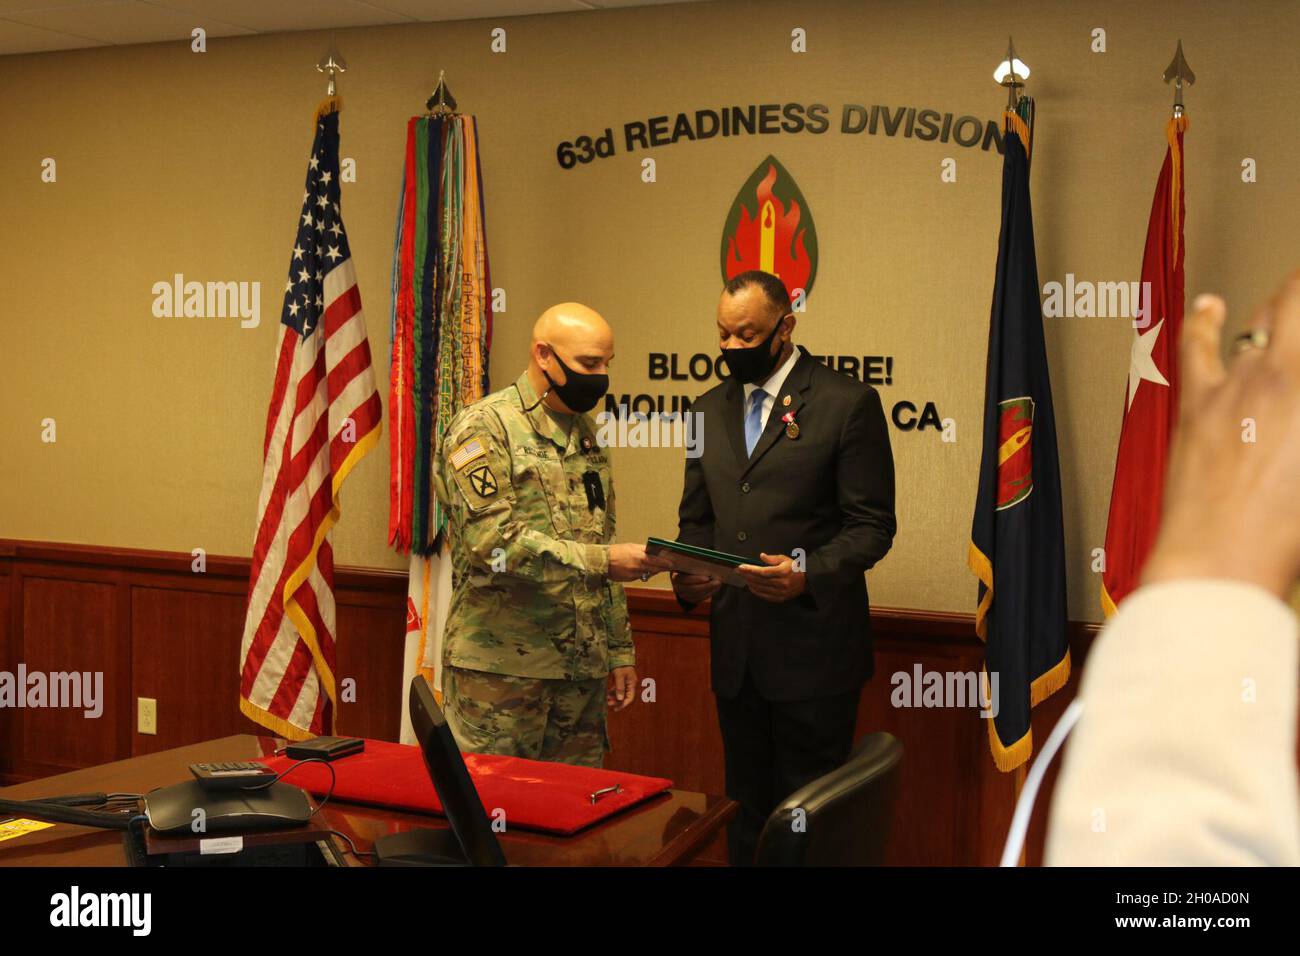 MOUNTAIN VIEW, Calif. - Mr. Kario Harris, civilian, chief of staff, 63d Readiness Division, receives the Meritorious Civilian Service Medal from Maj. Gen. Alberto Rosende, commanding general, 63d RD during 63d RD's Headquarters and Headquarters Detachment's Soldier Virtual Battle Assembly, Jan. 8, 2021. Stock Photo